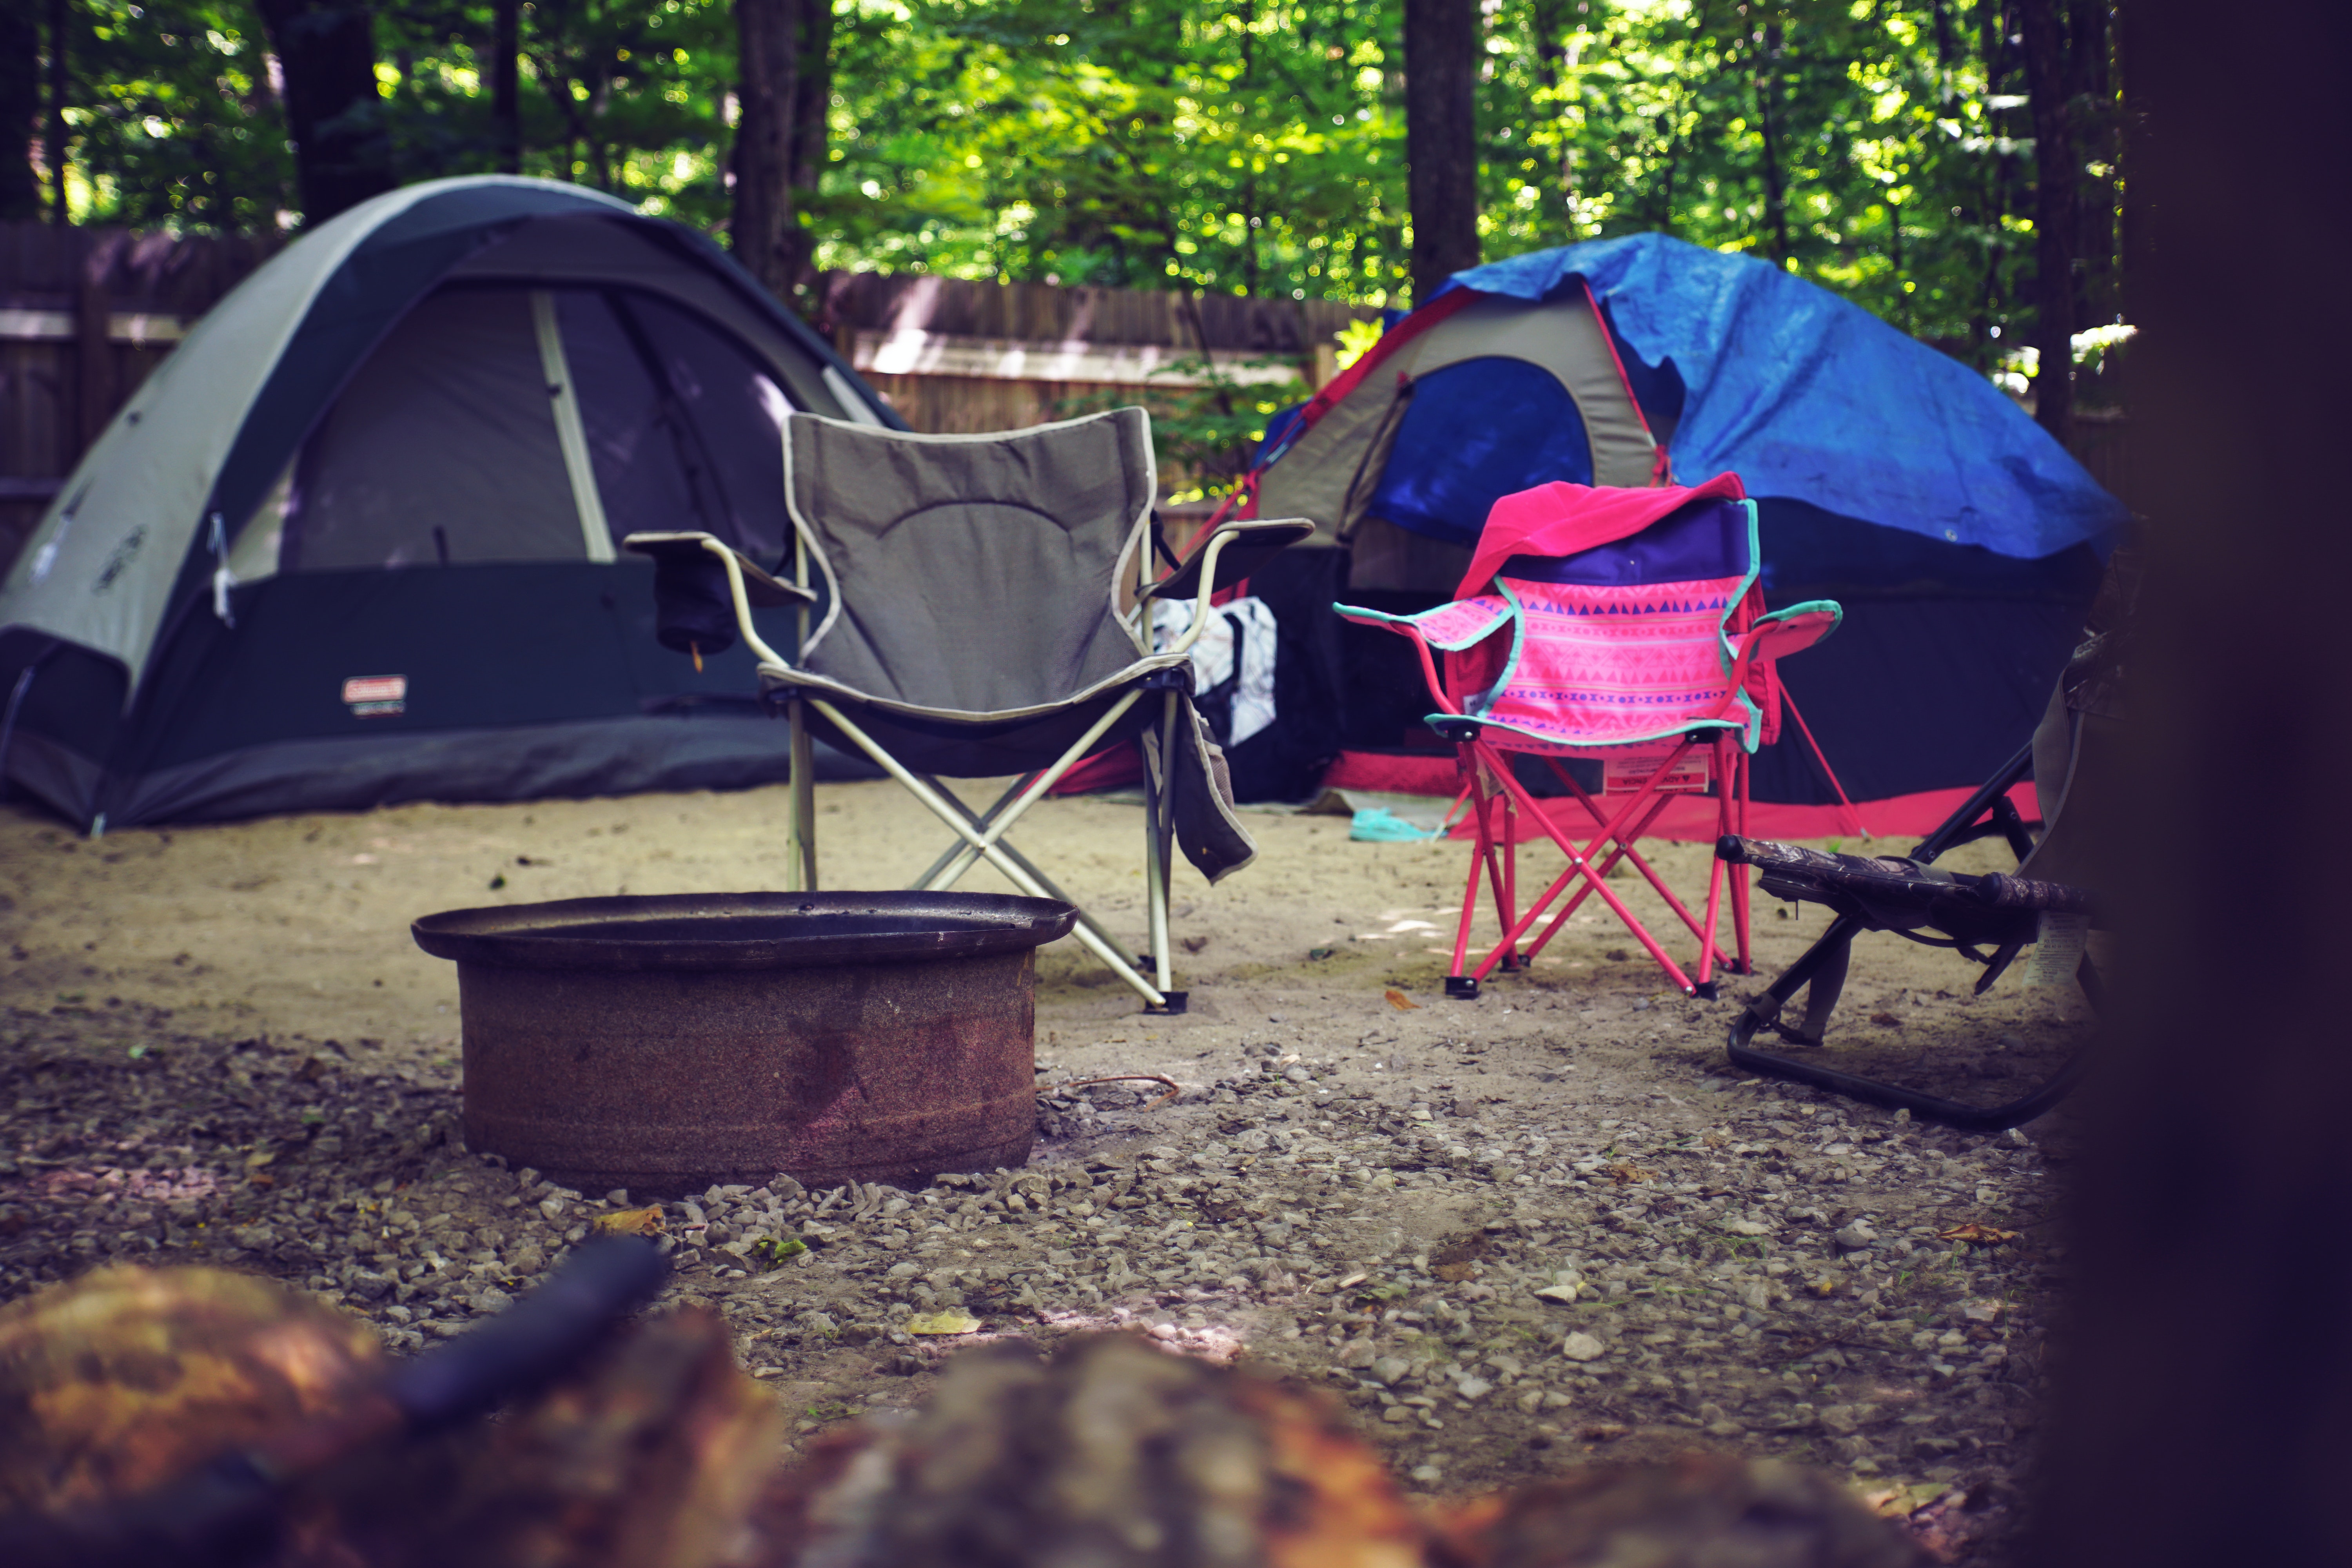 Best Free Camping & Image · 100% Royalty Free HD Downloads